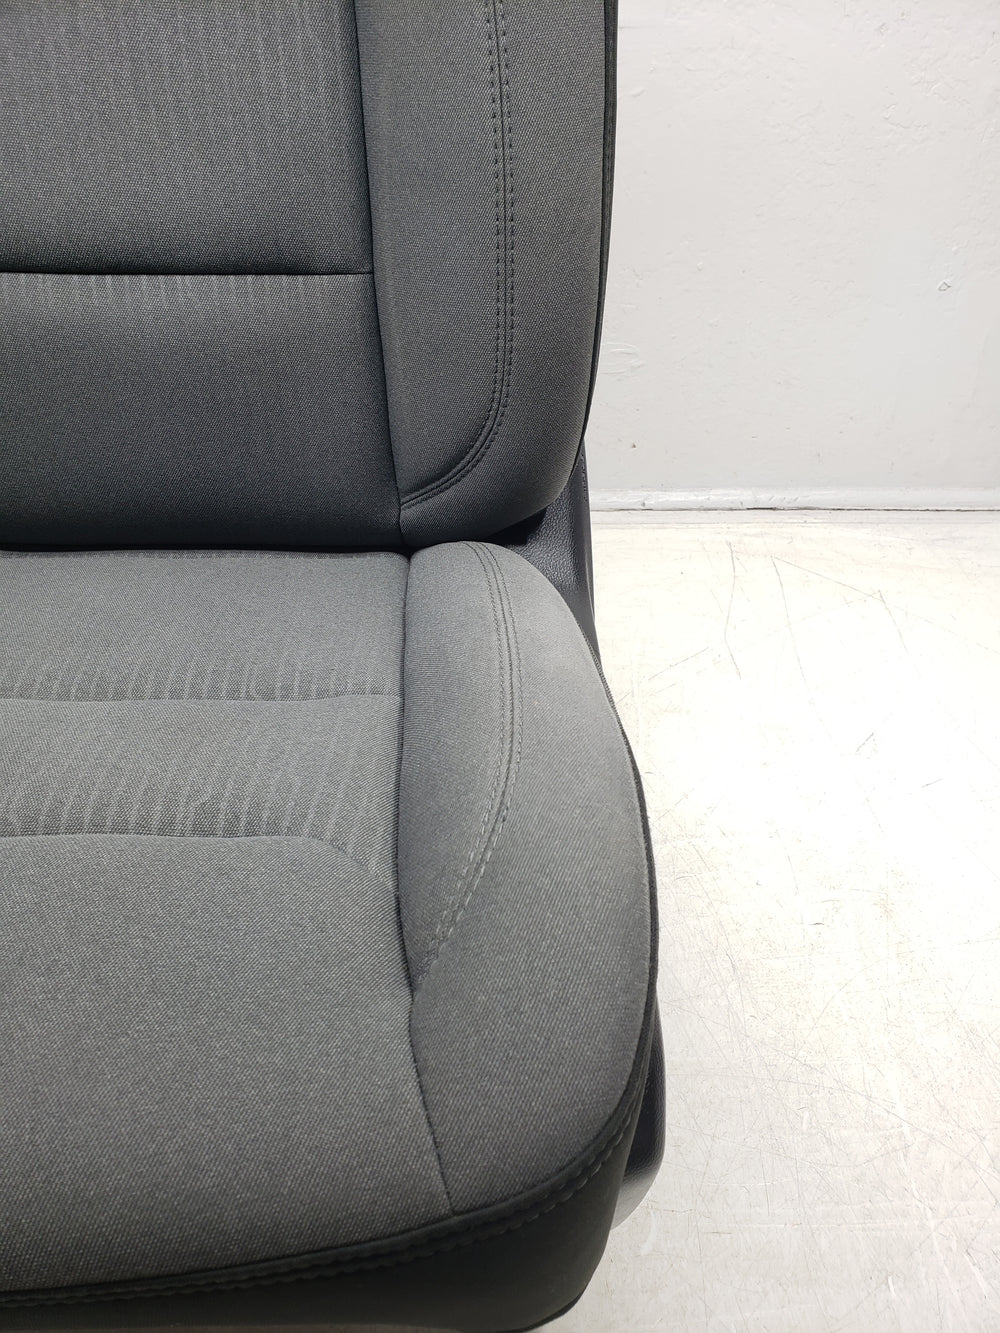 2019 - 2024 Dodge Ram Powered Driver Seat, Light Gray Cloth, 1500 DT #1452 | Picture # 6 | OEM Seats